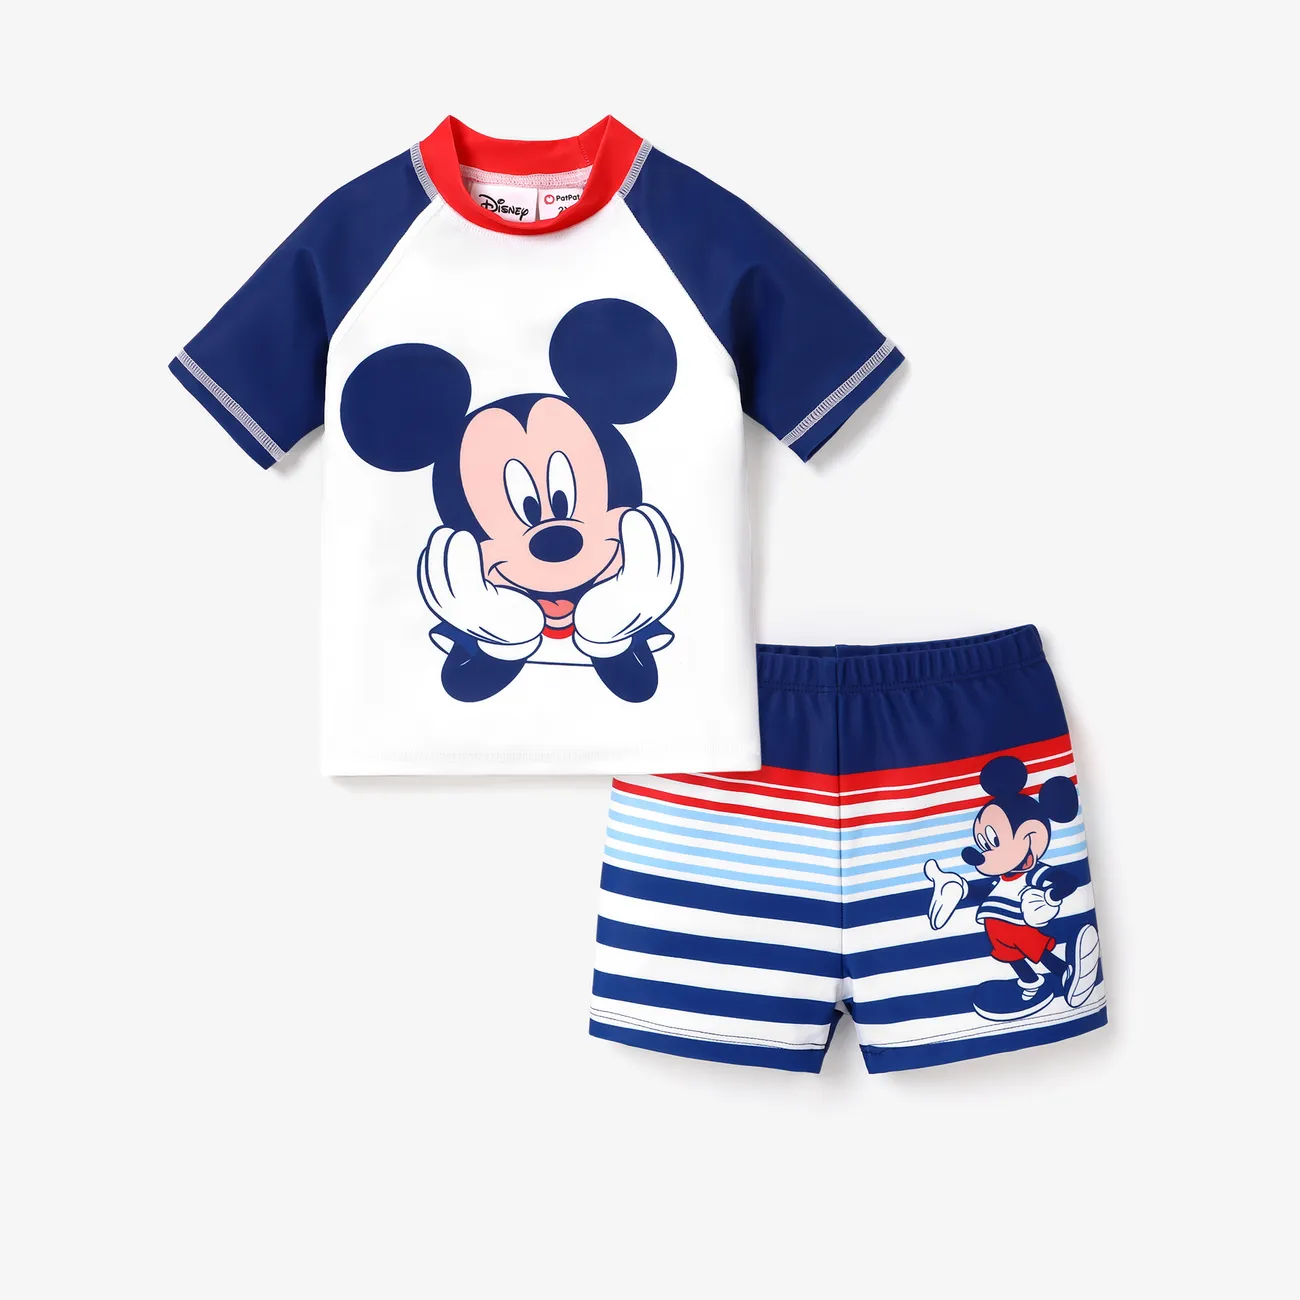 Disney Mickey and Friends Muttertag Geschwister-Outfits Badeanzüge Mehrfarbig big image 1